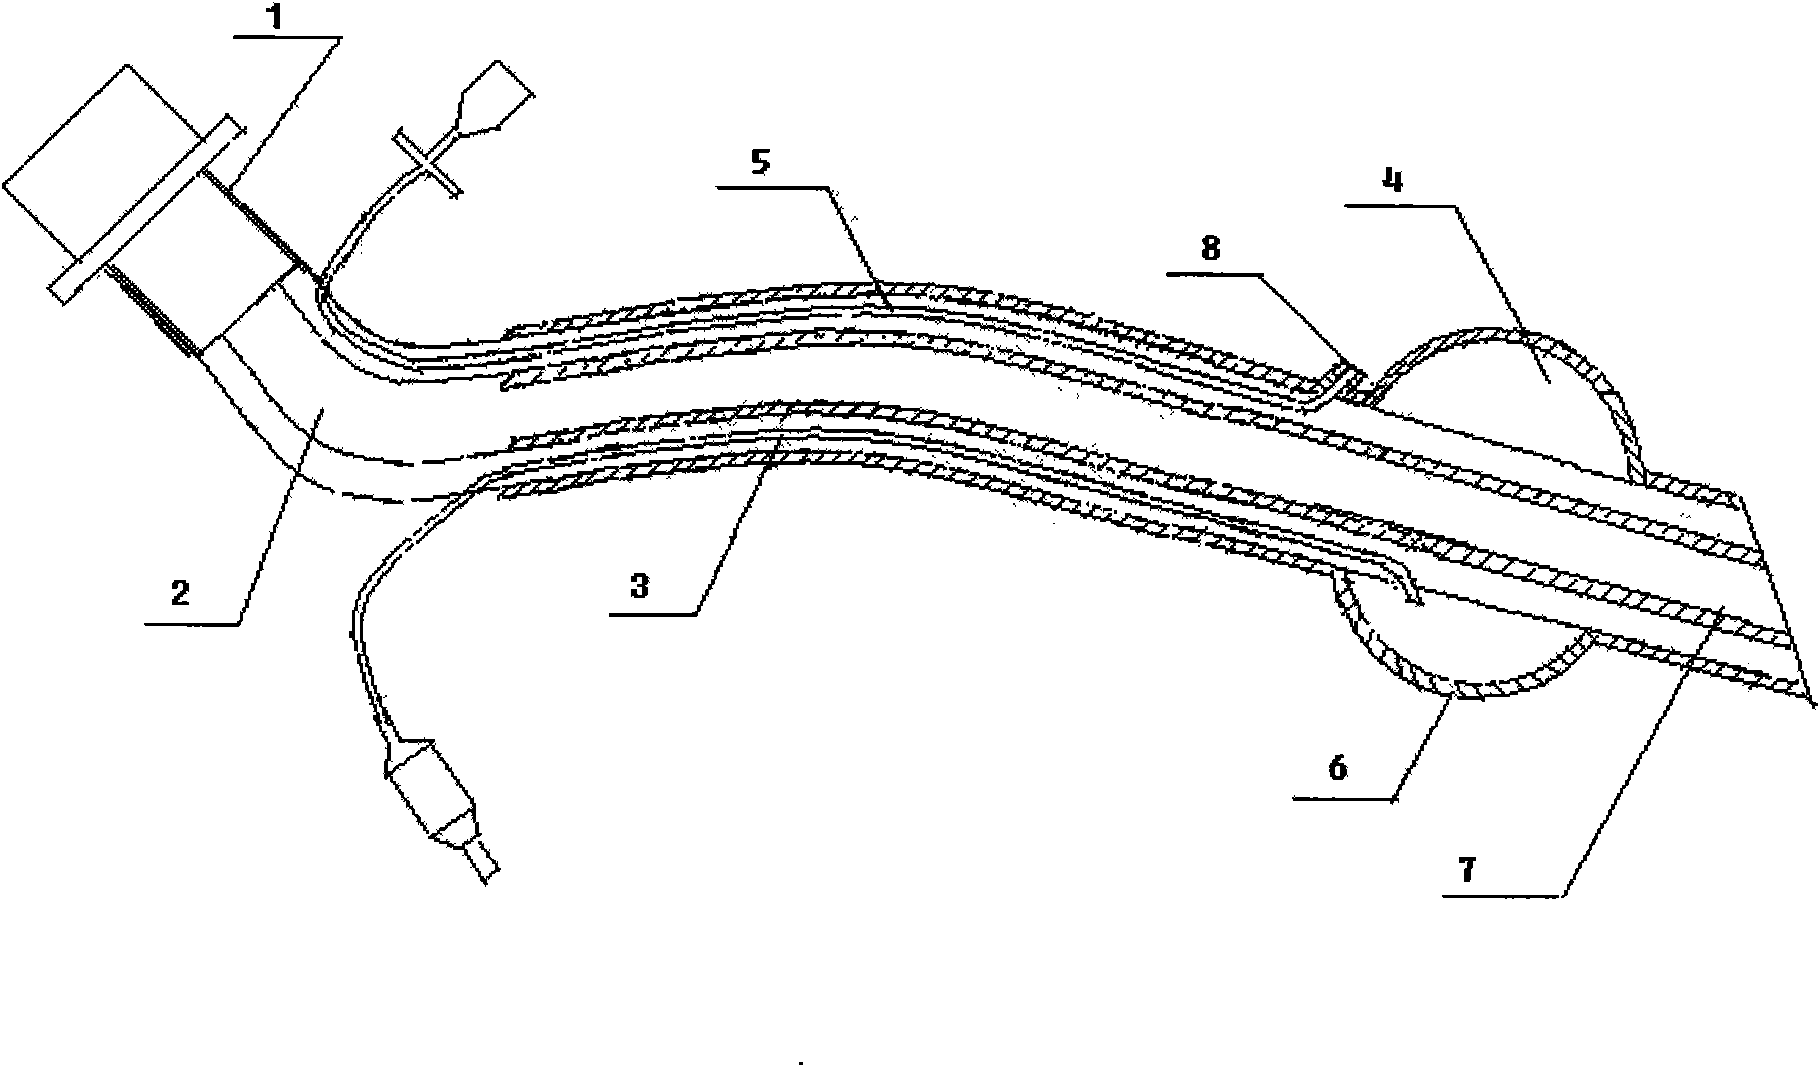 Artificial trachea cannula with nanometre anti-microbial coating